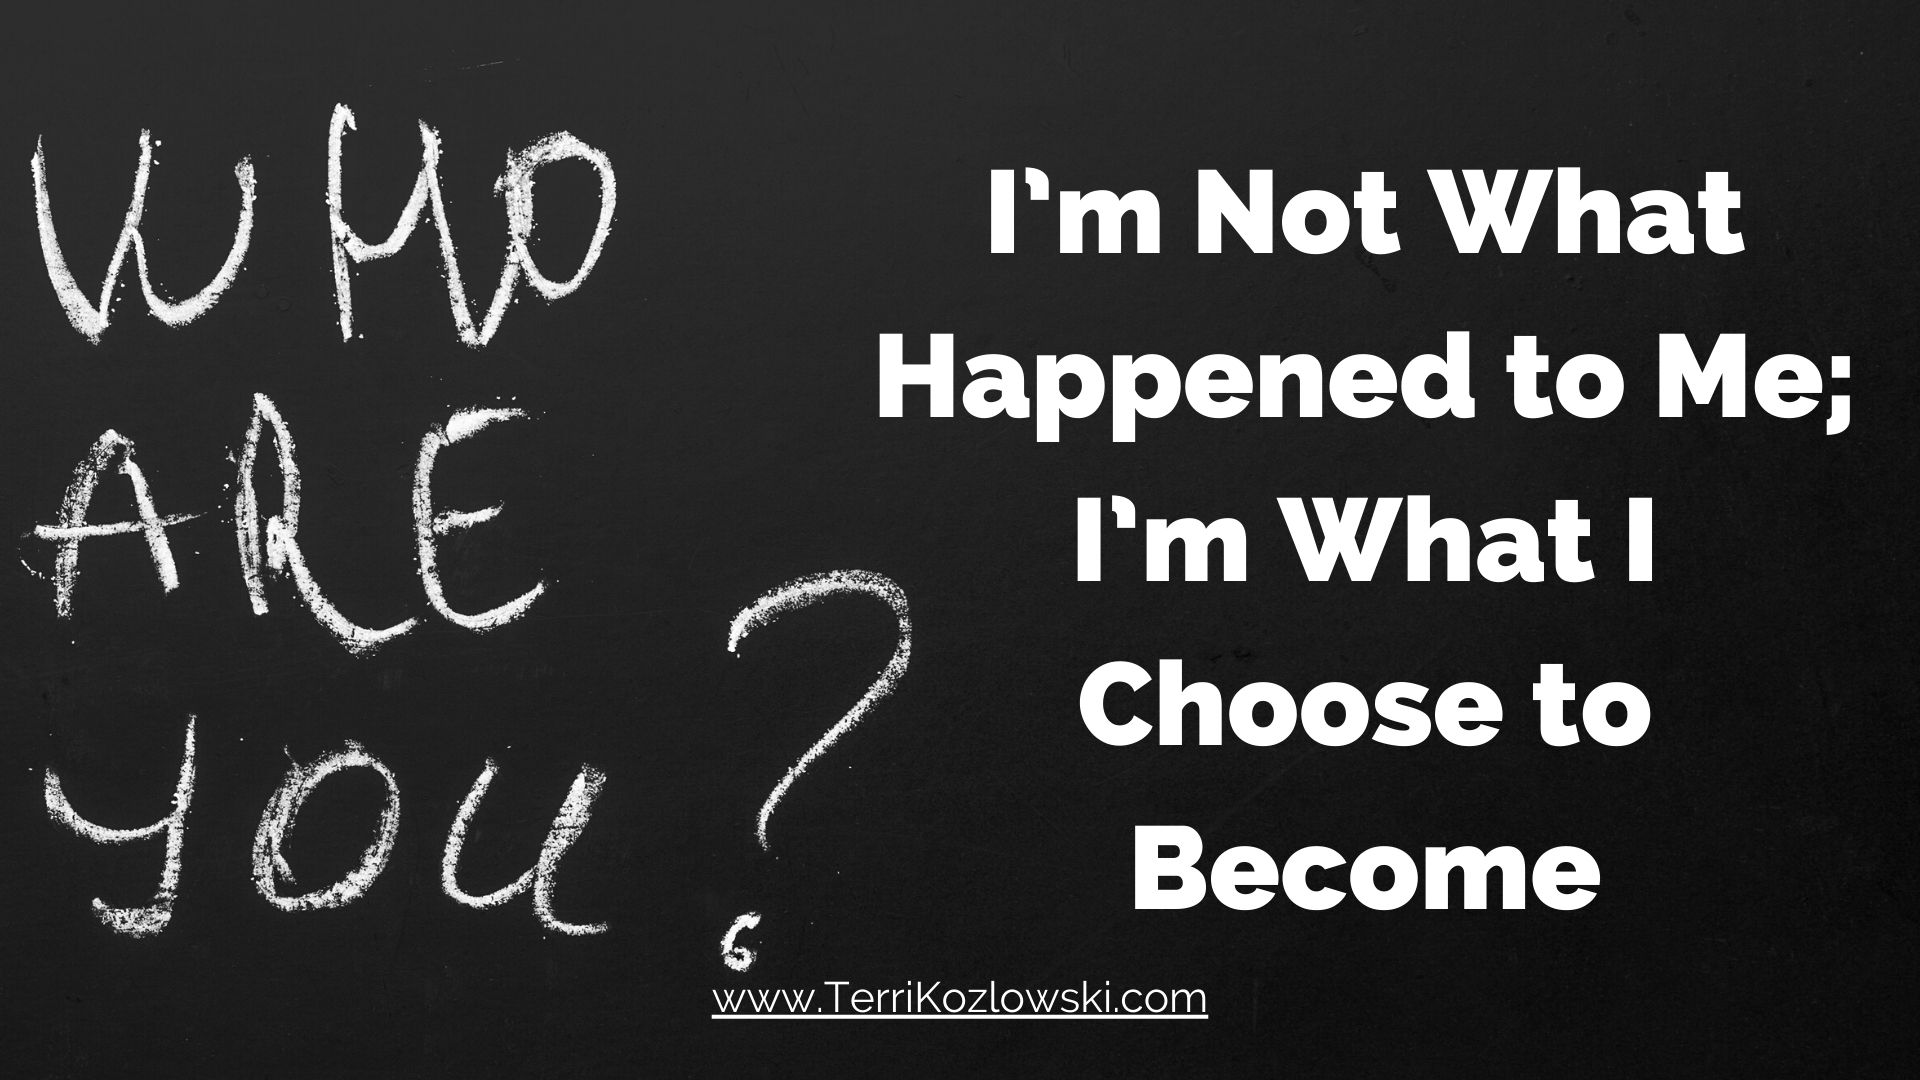 I’m Not What Happened to Me; I’m What I Choose to Become